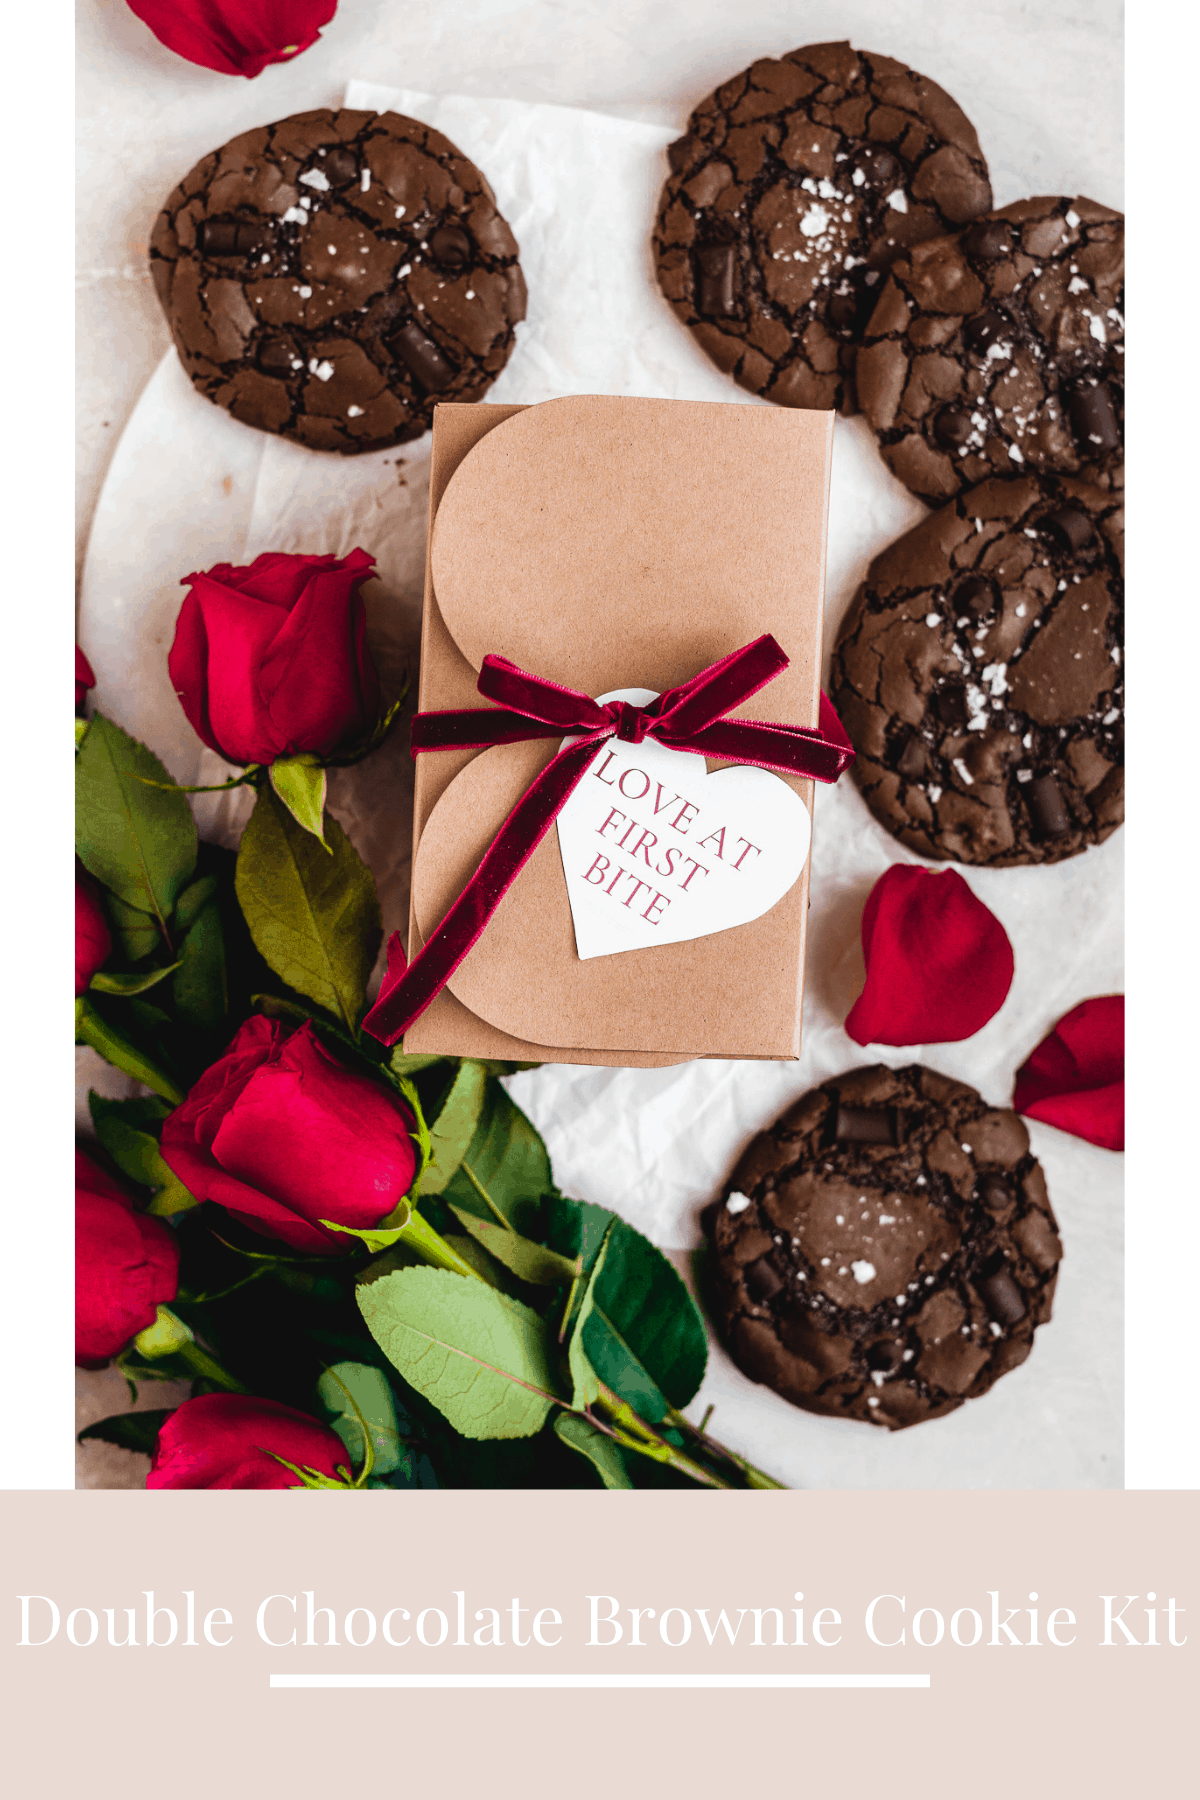 Brown box with red bow on a white surface with chocolate cookies and red roses.